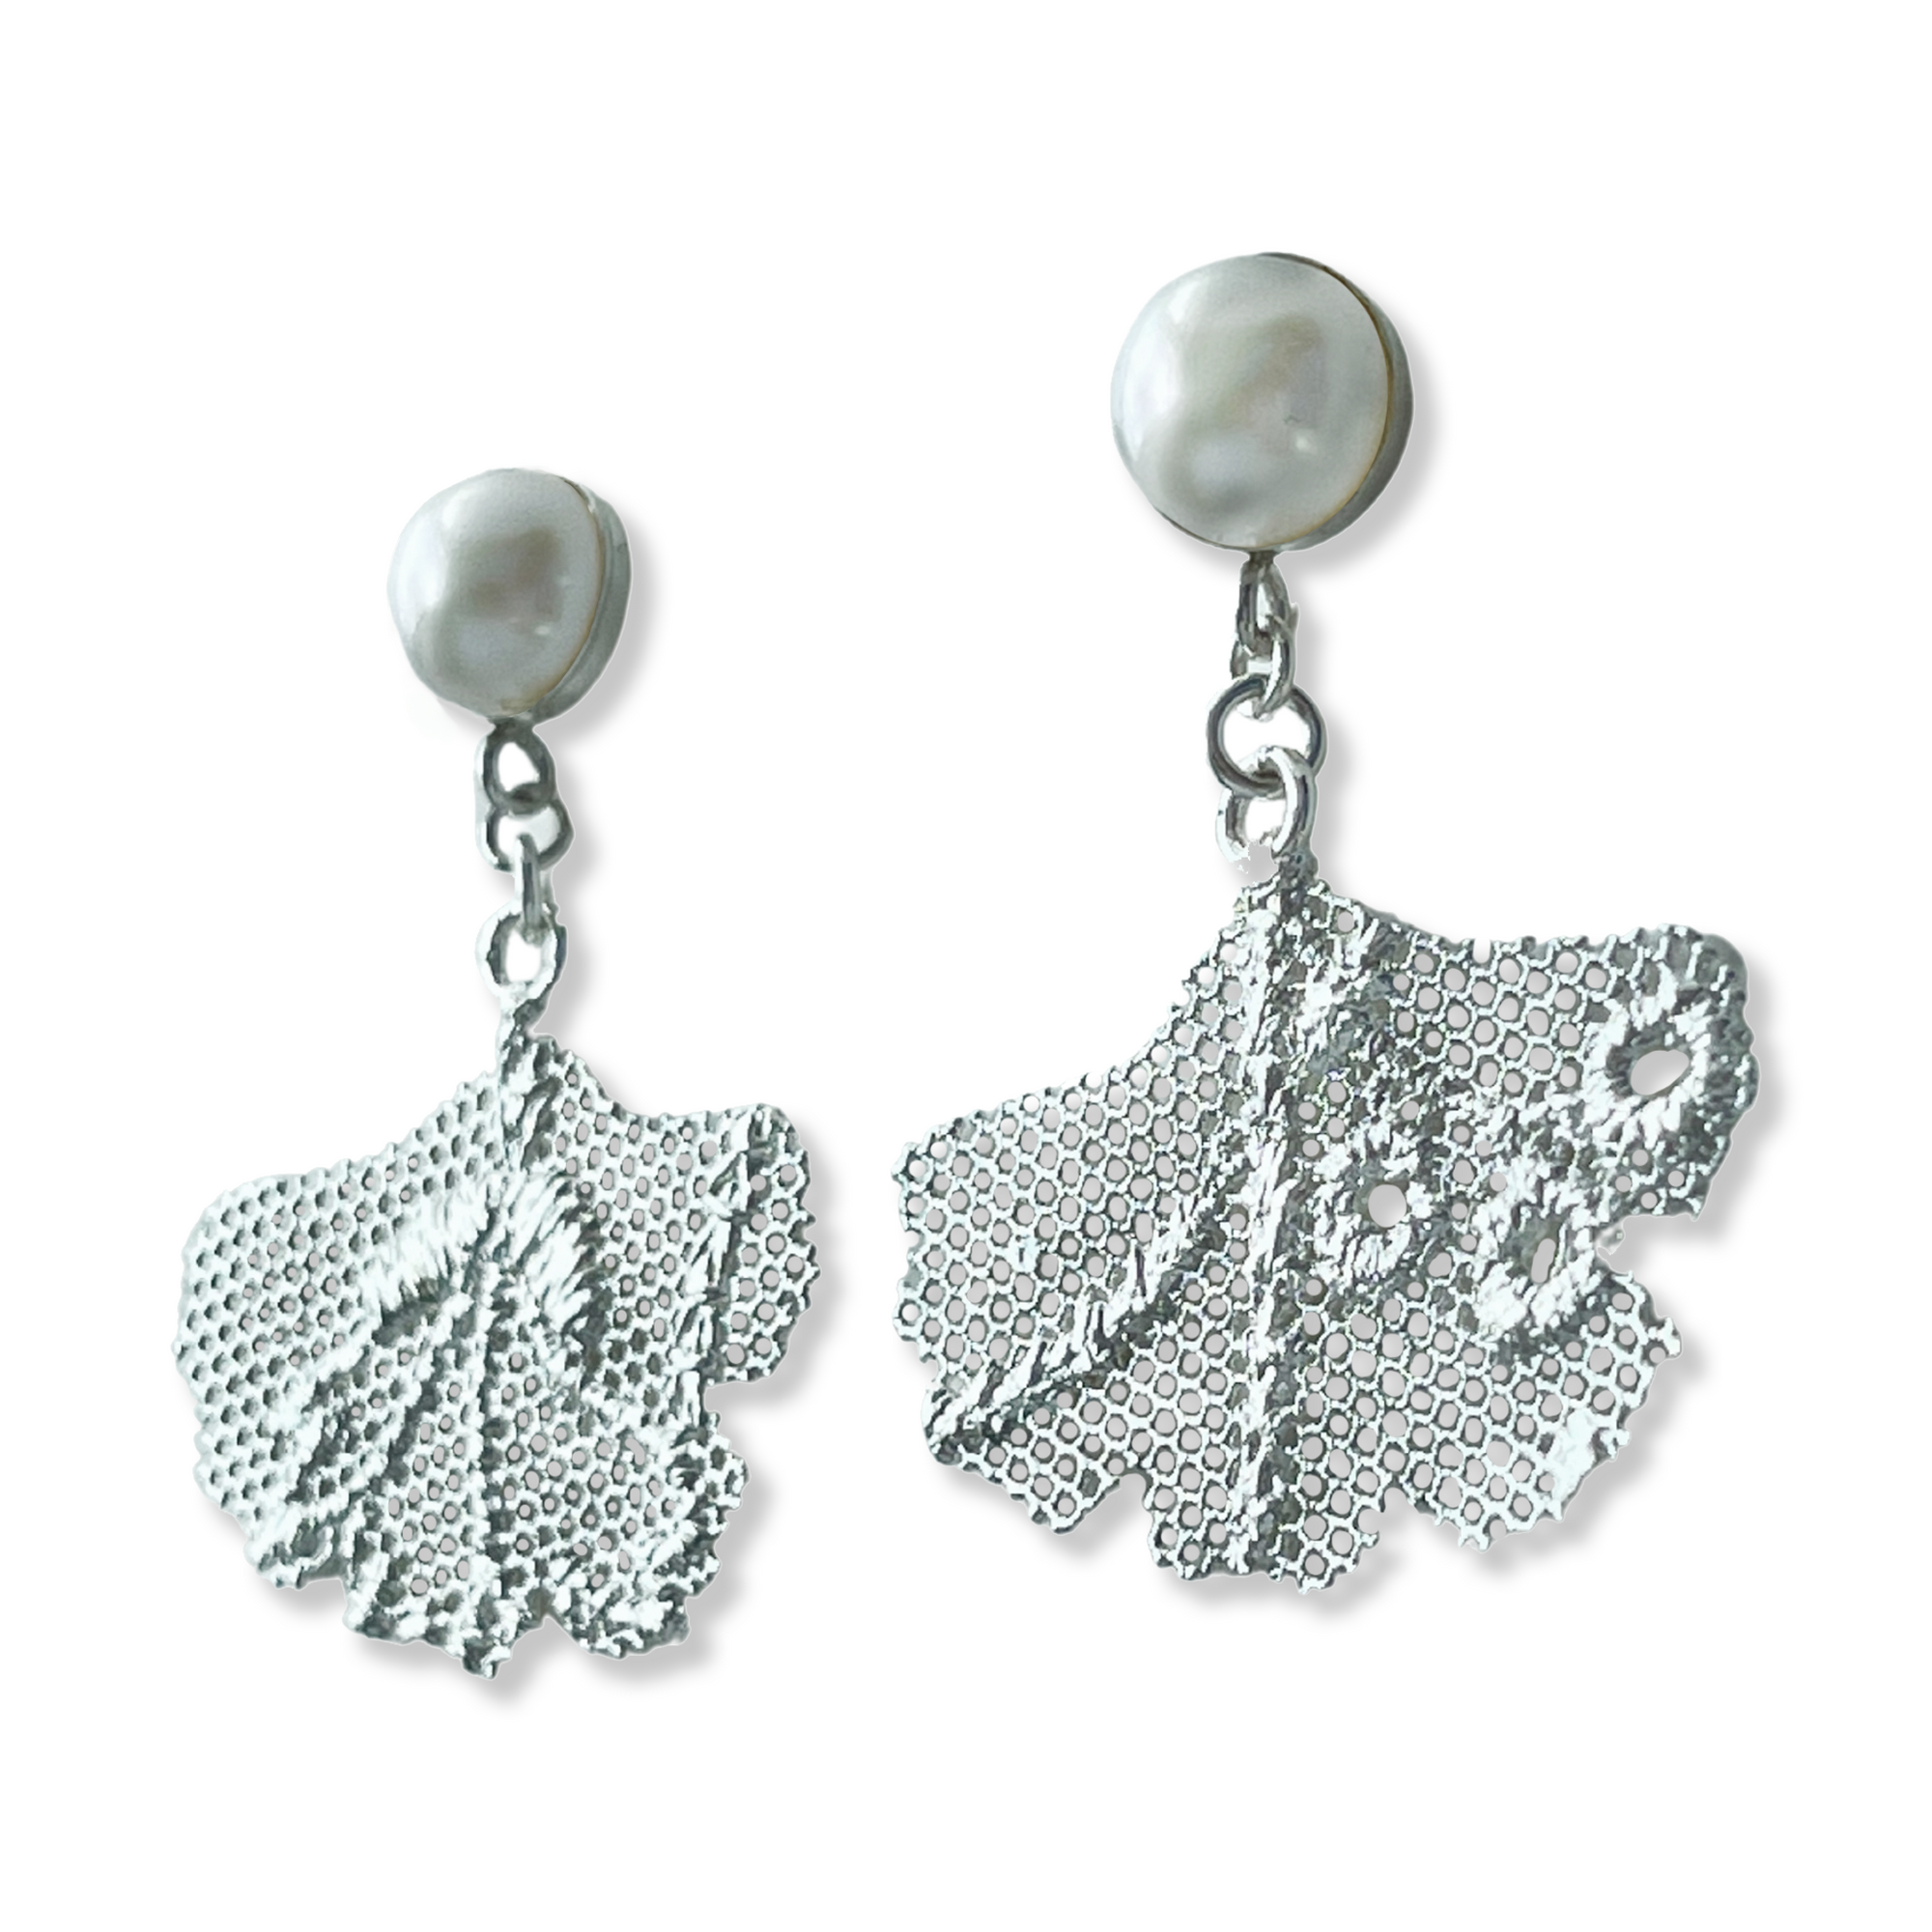 Pearl earrings with lace in the shape of a ginkgo leaf in sterling silver.